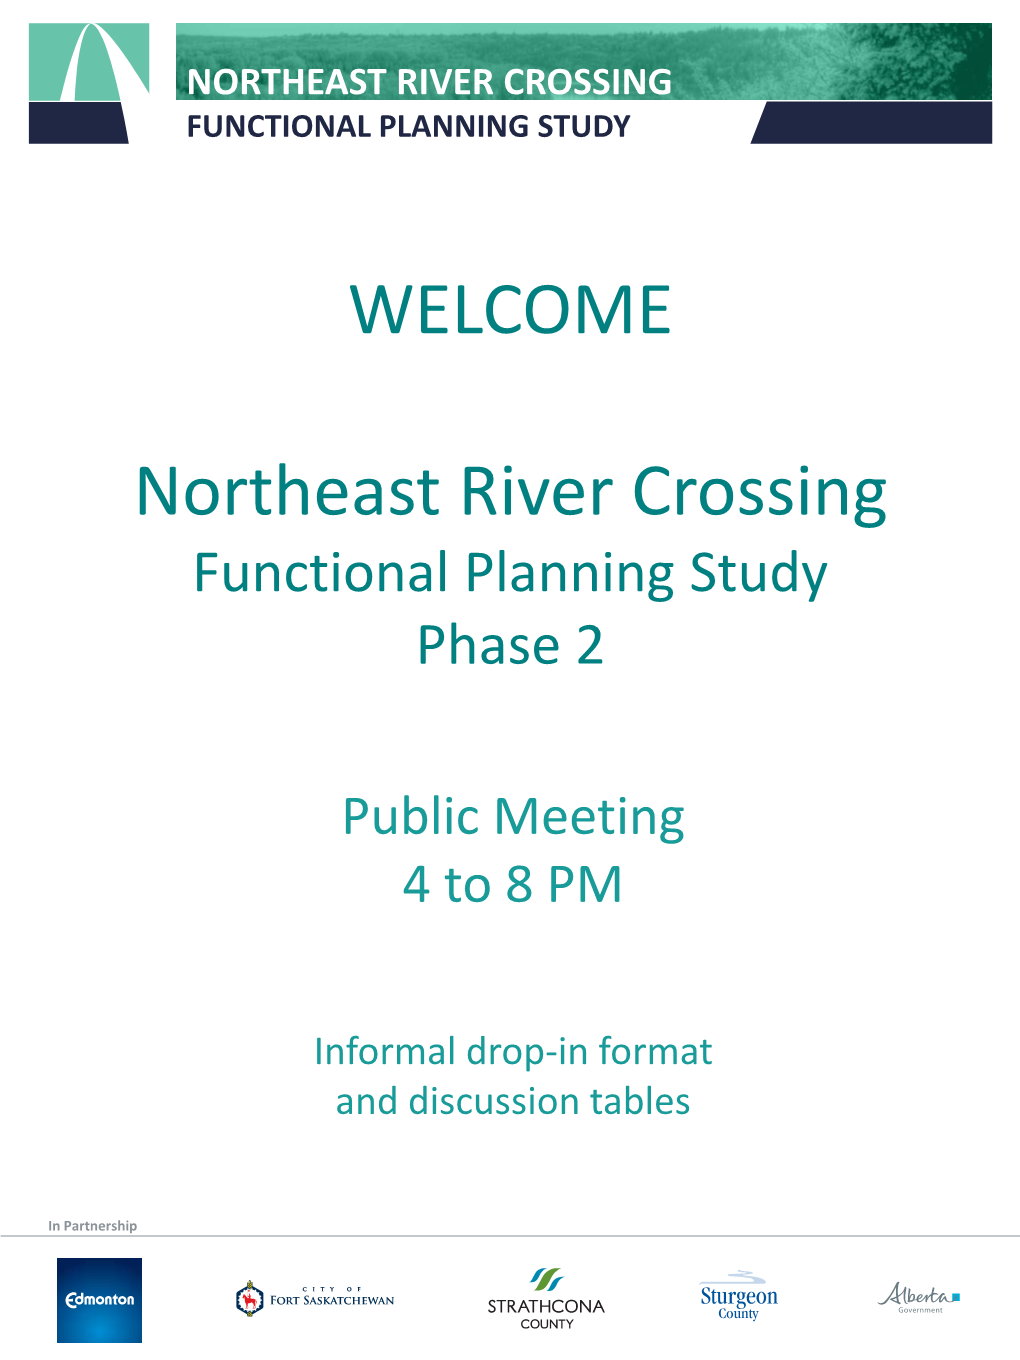 WELCOME Northeast River Crossing